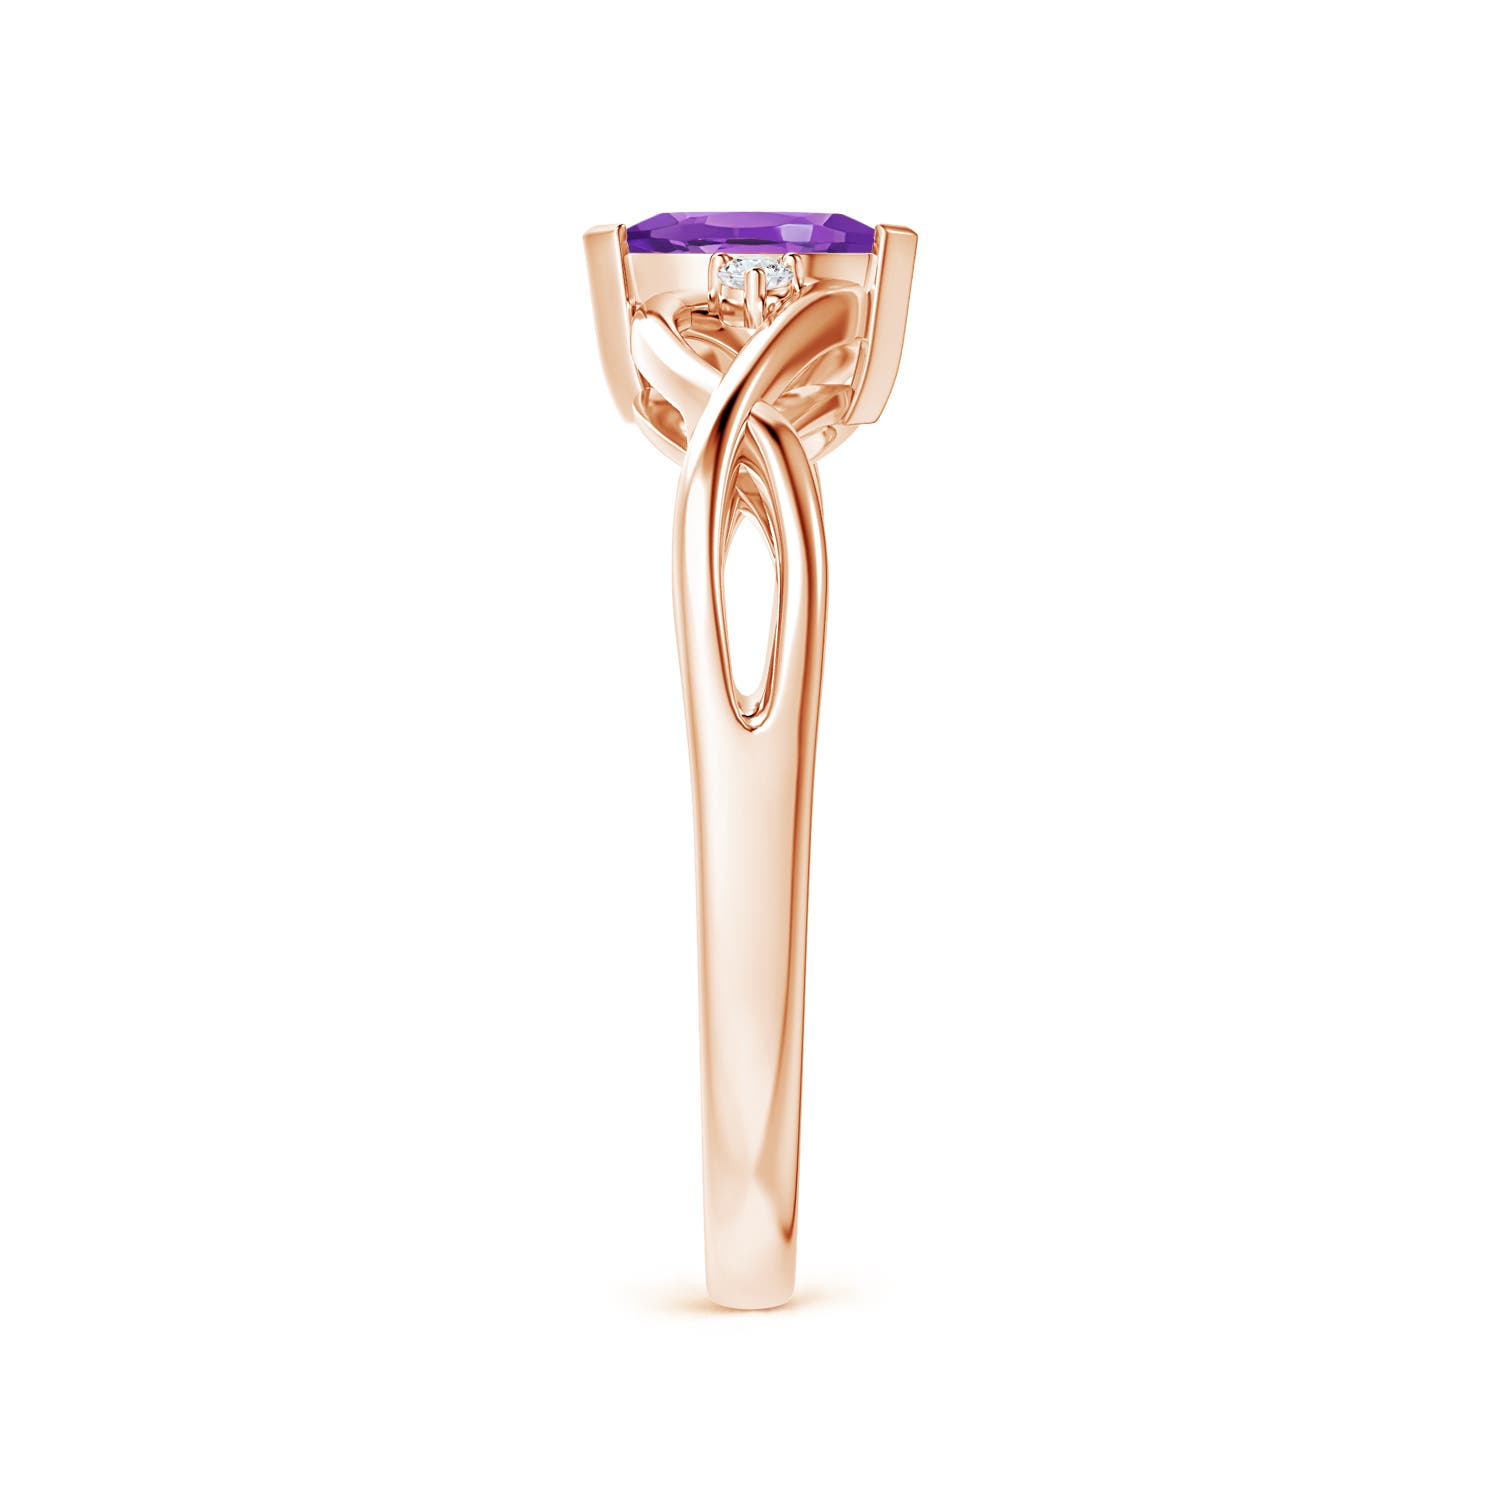 AAA - Amethyst / 0.23 CT / 14 KT Rose Gold